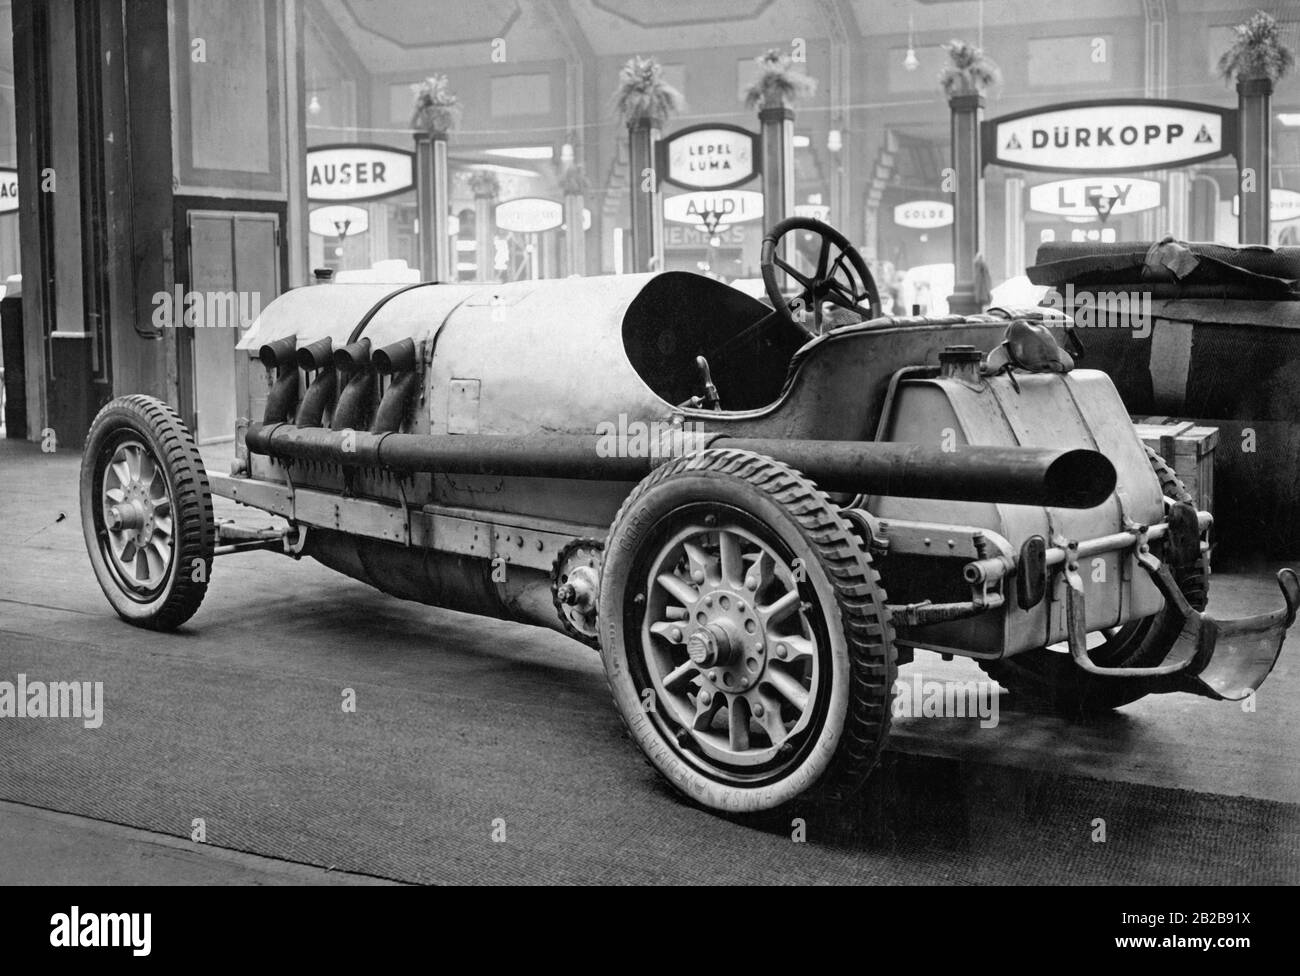 The Benz 200 PS, called 'Blitzen-Benz' or 'Lightning Benz', from 1909 was the fastest pre-war car with a speed of 228 km/h. Here it is on display at the Allgemeine Deutsche Automobil-Ausstellung (now IAA - International Motor Show Germany), in Berlin on the Kaiserdamm in 1926. The aerodynamic rear section has been removed to reveal the tank. Inside the car is the hand pump for the fuel, which had to be operated by the passenger. Stock Photo